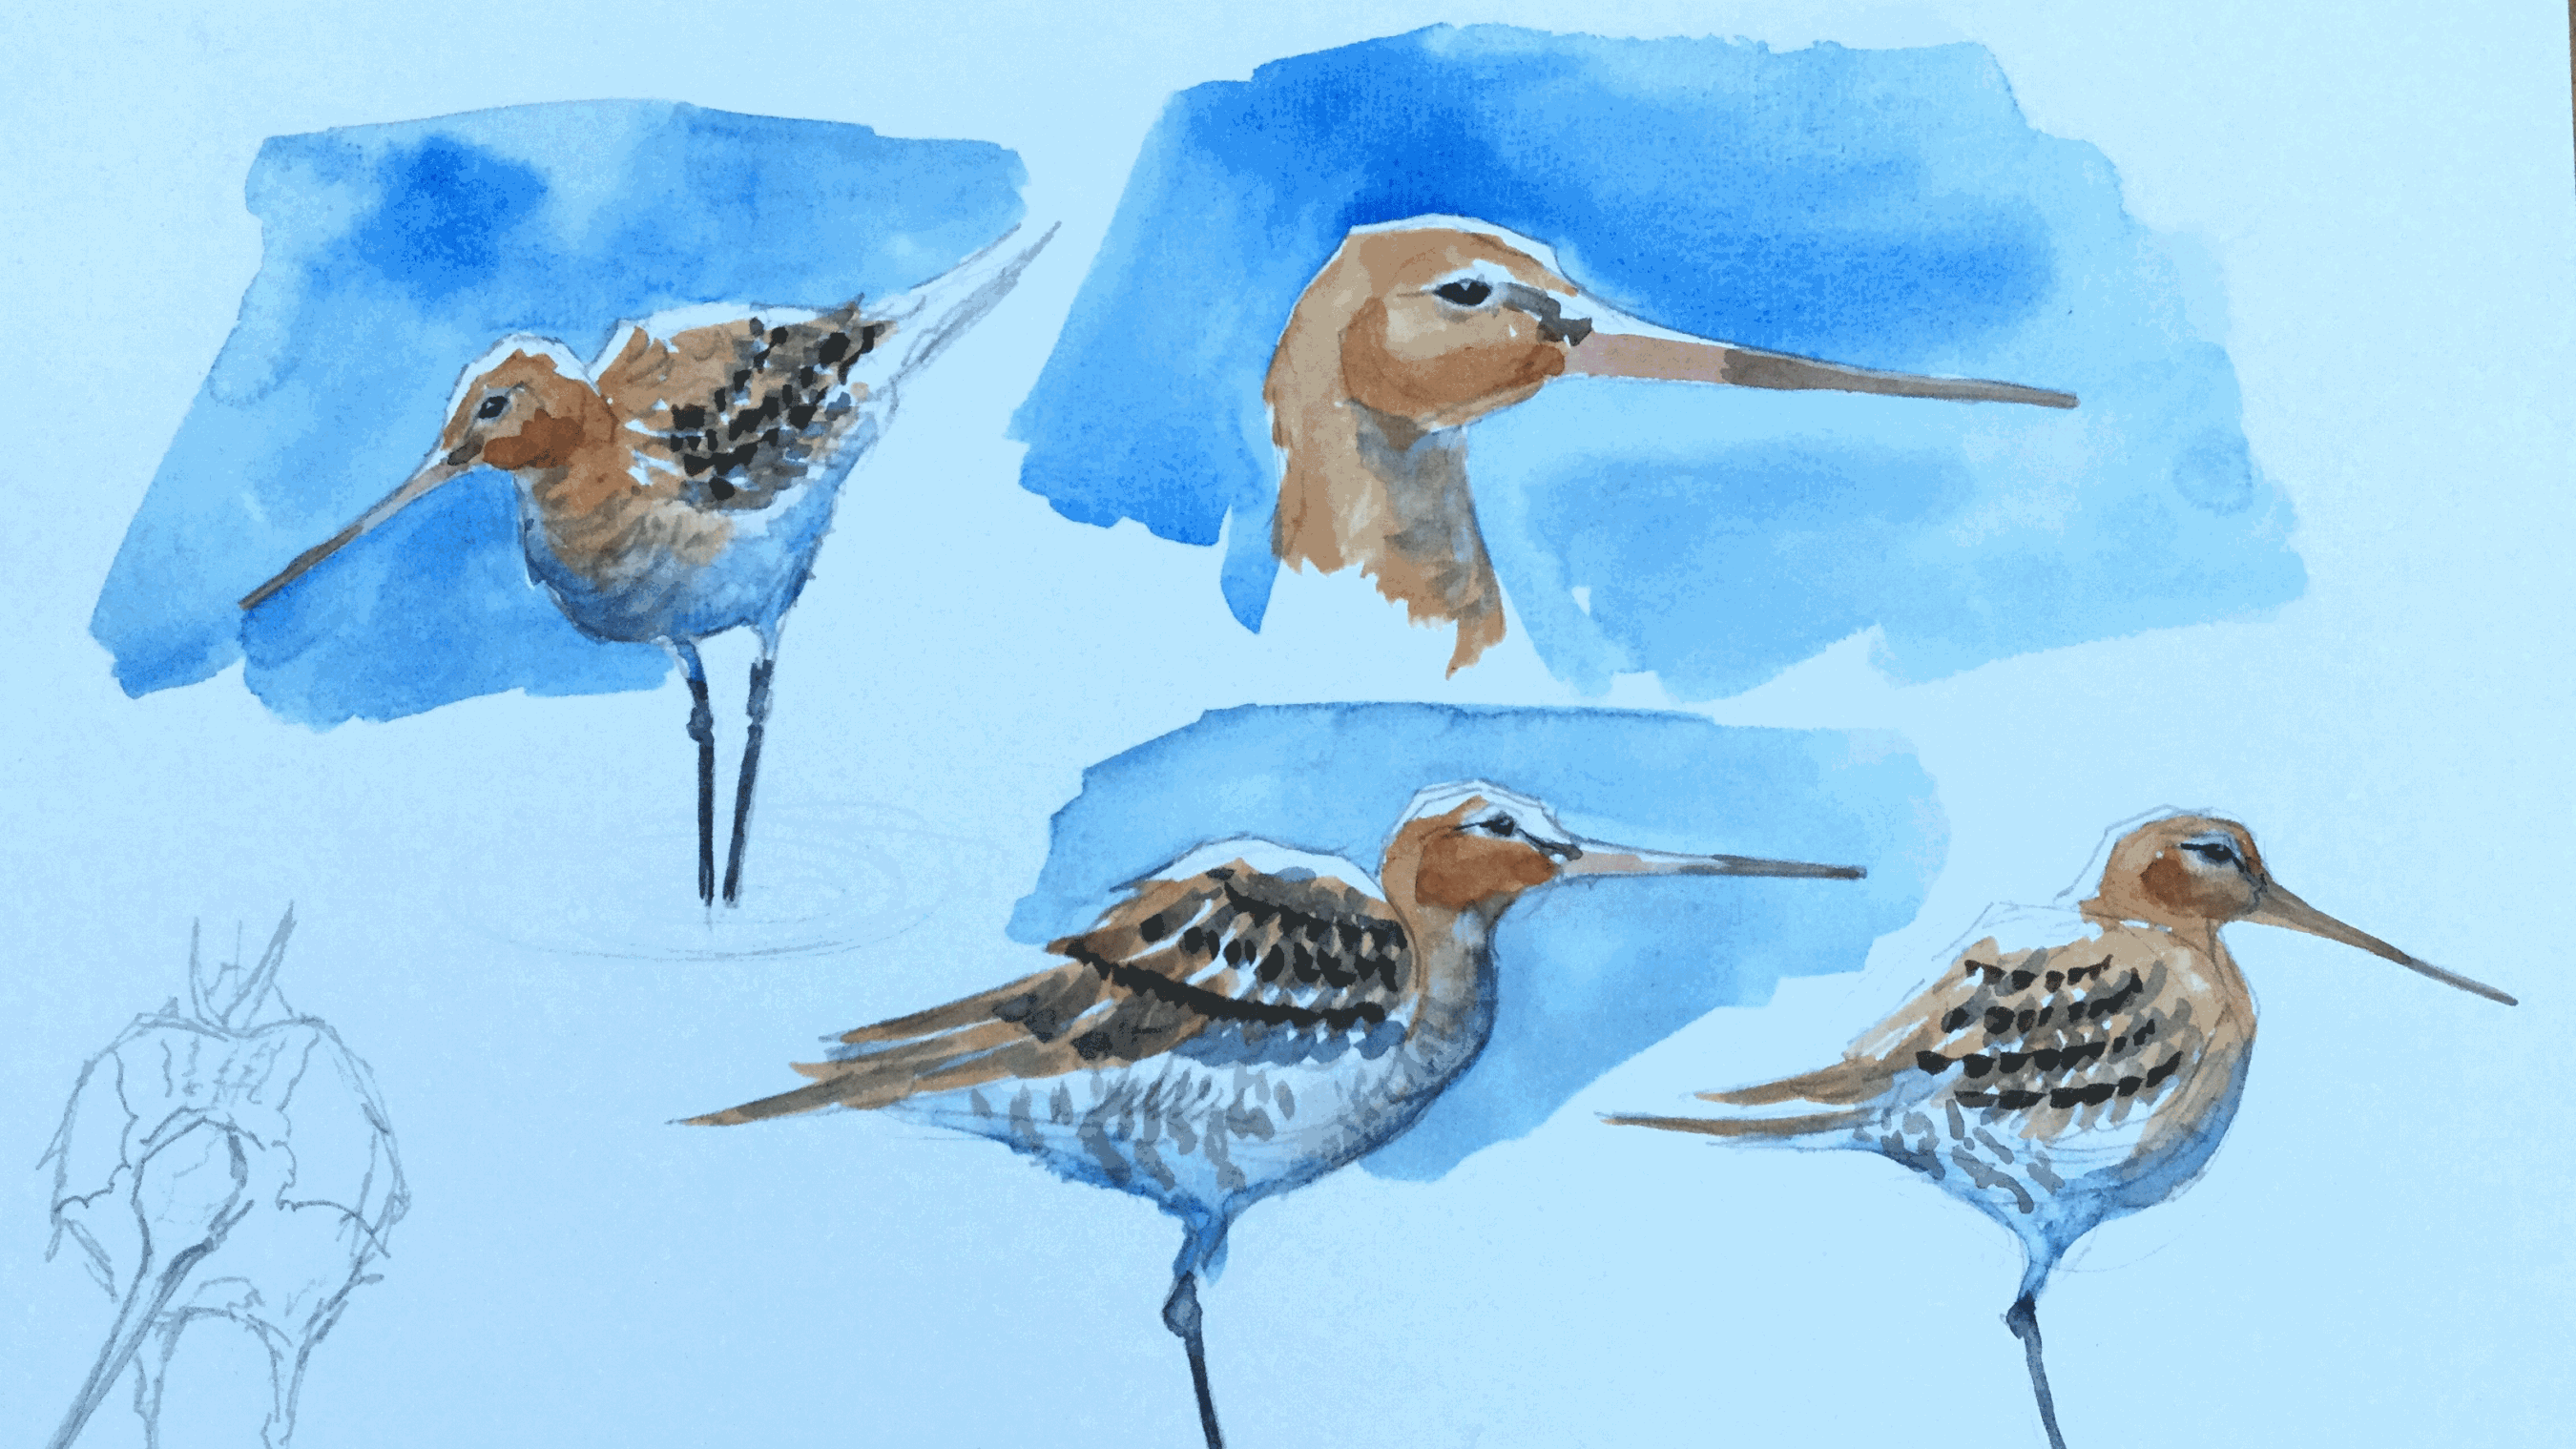 Capturing Birds Quickly, NWT Cley Marshes NR25 7SA | Martin Gibbons loves capturing light, landscape and wildlife in natural spaces. As a keen birder he has an eye for capturing fleeting moments quickly in the field | Workshop, sketching, nature